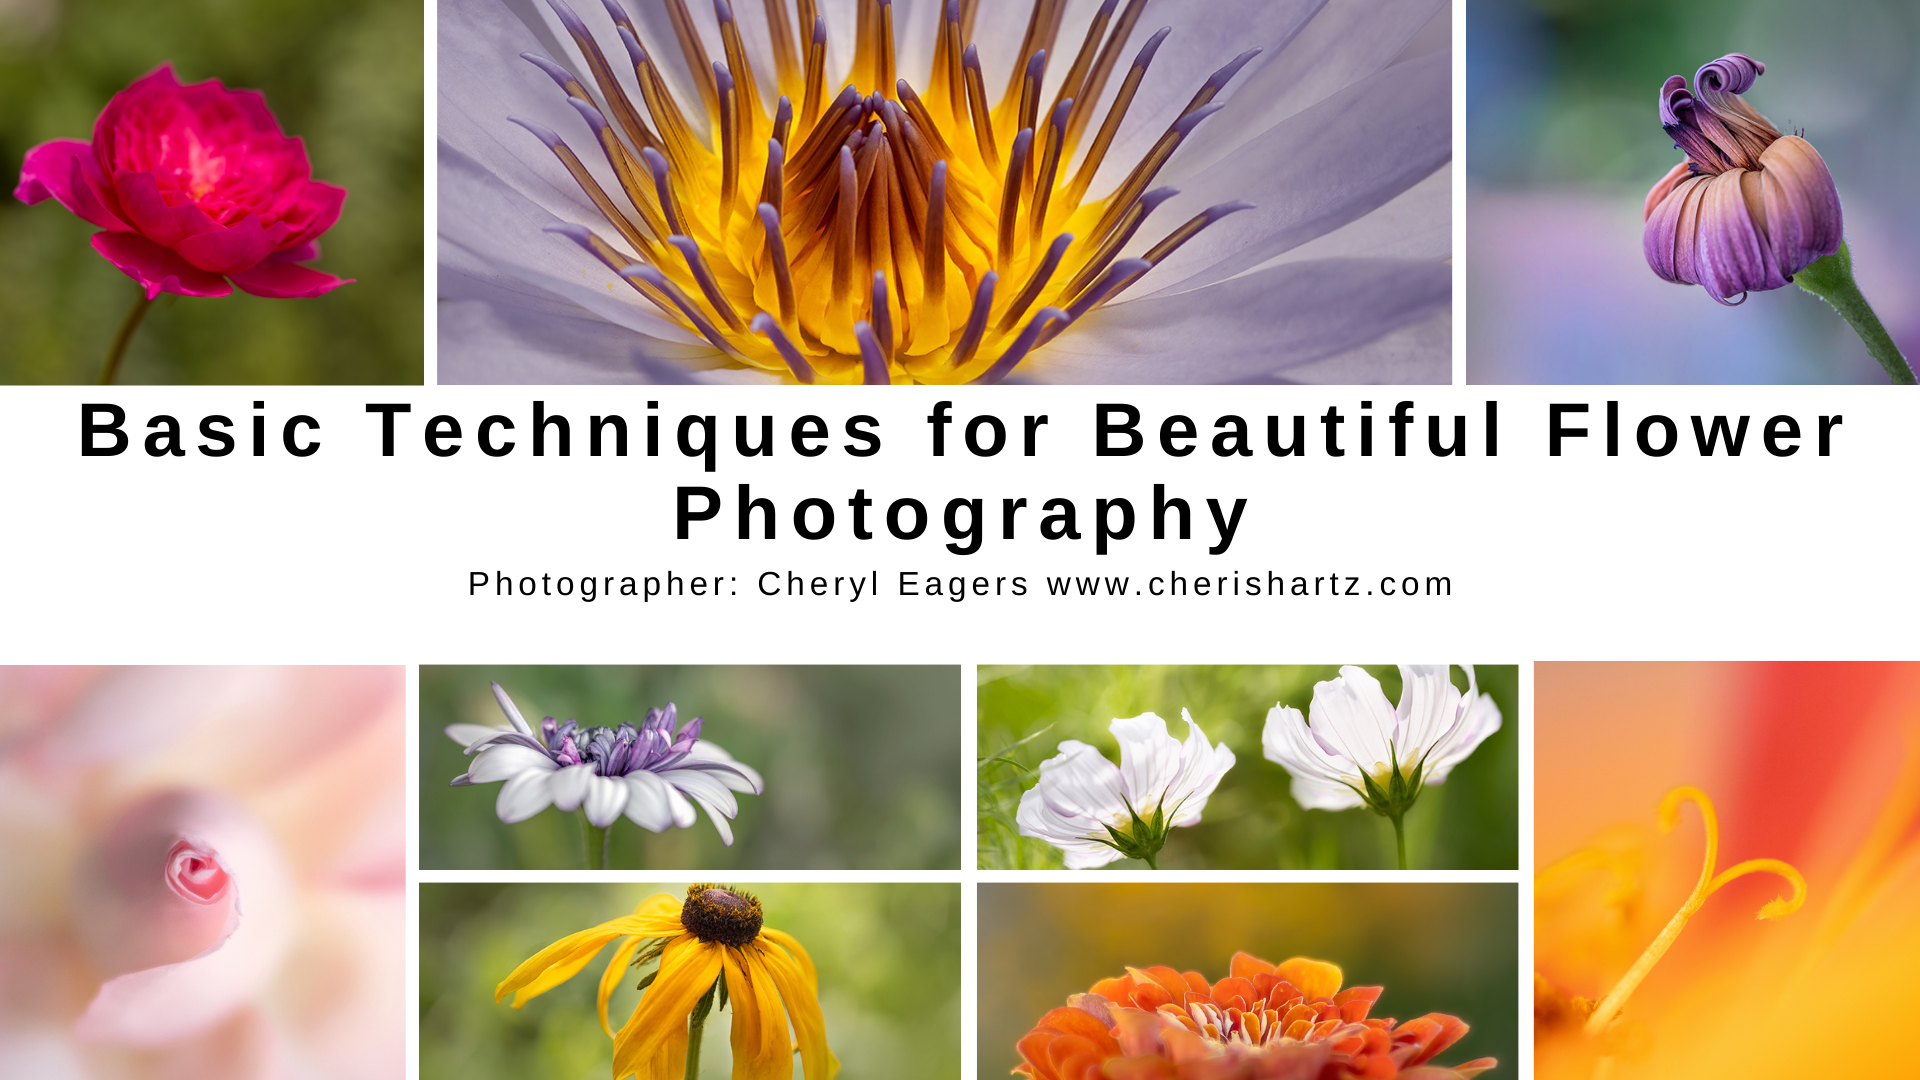 LEARN TECHNIQUES TO CAPTURE FLOWERS IN PHOTOGRAPHY TO MAKE AN IMPACT